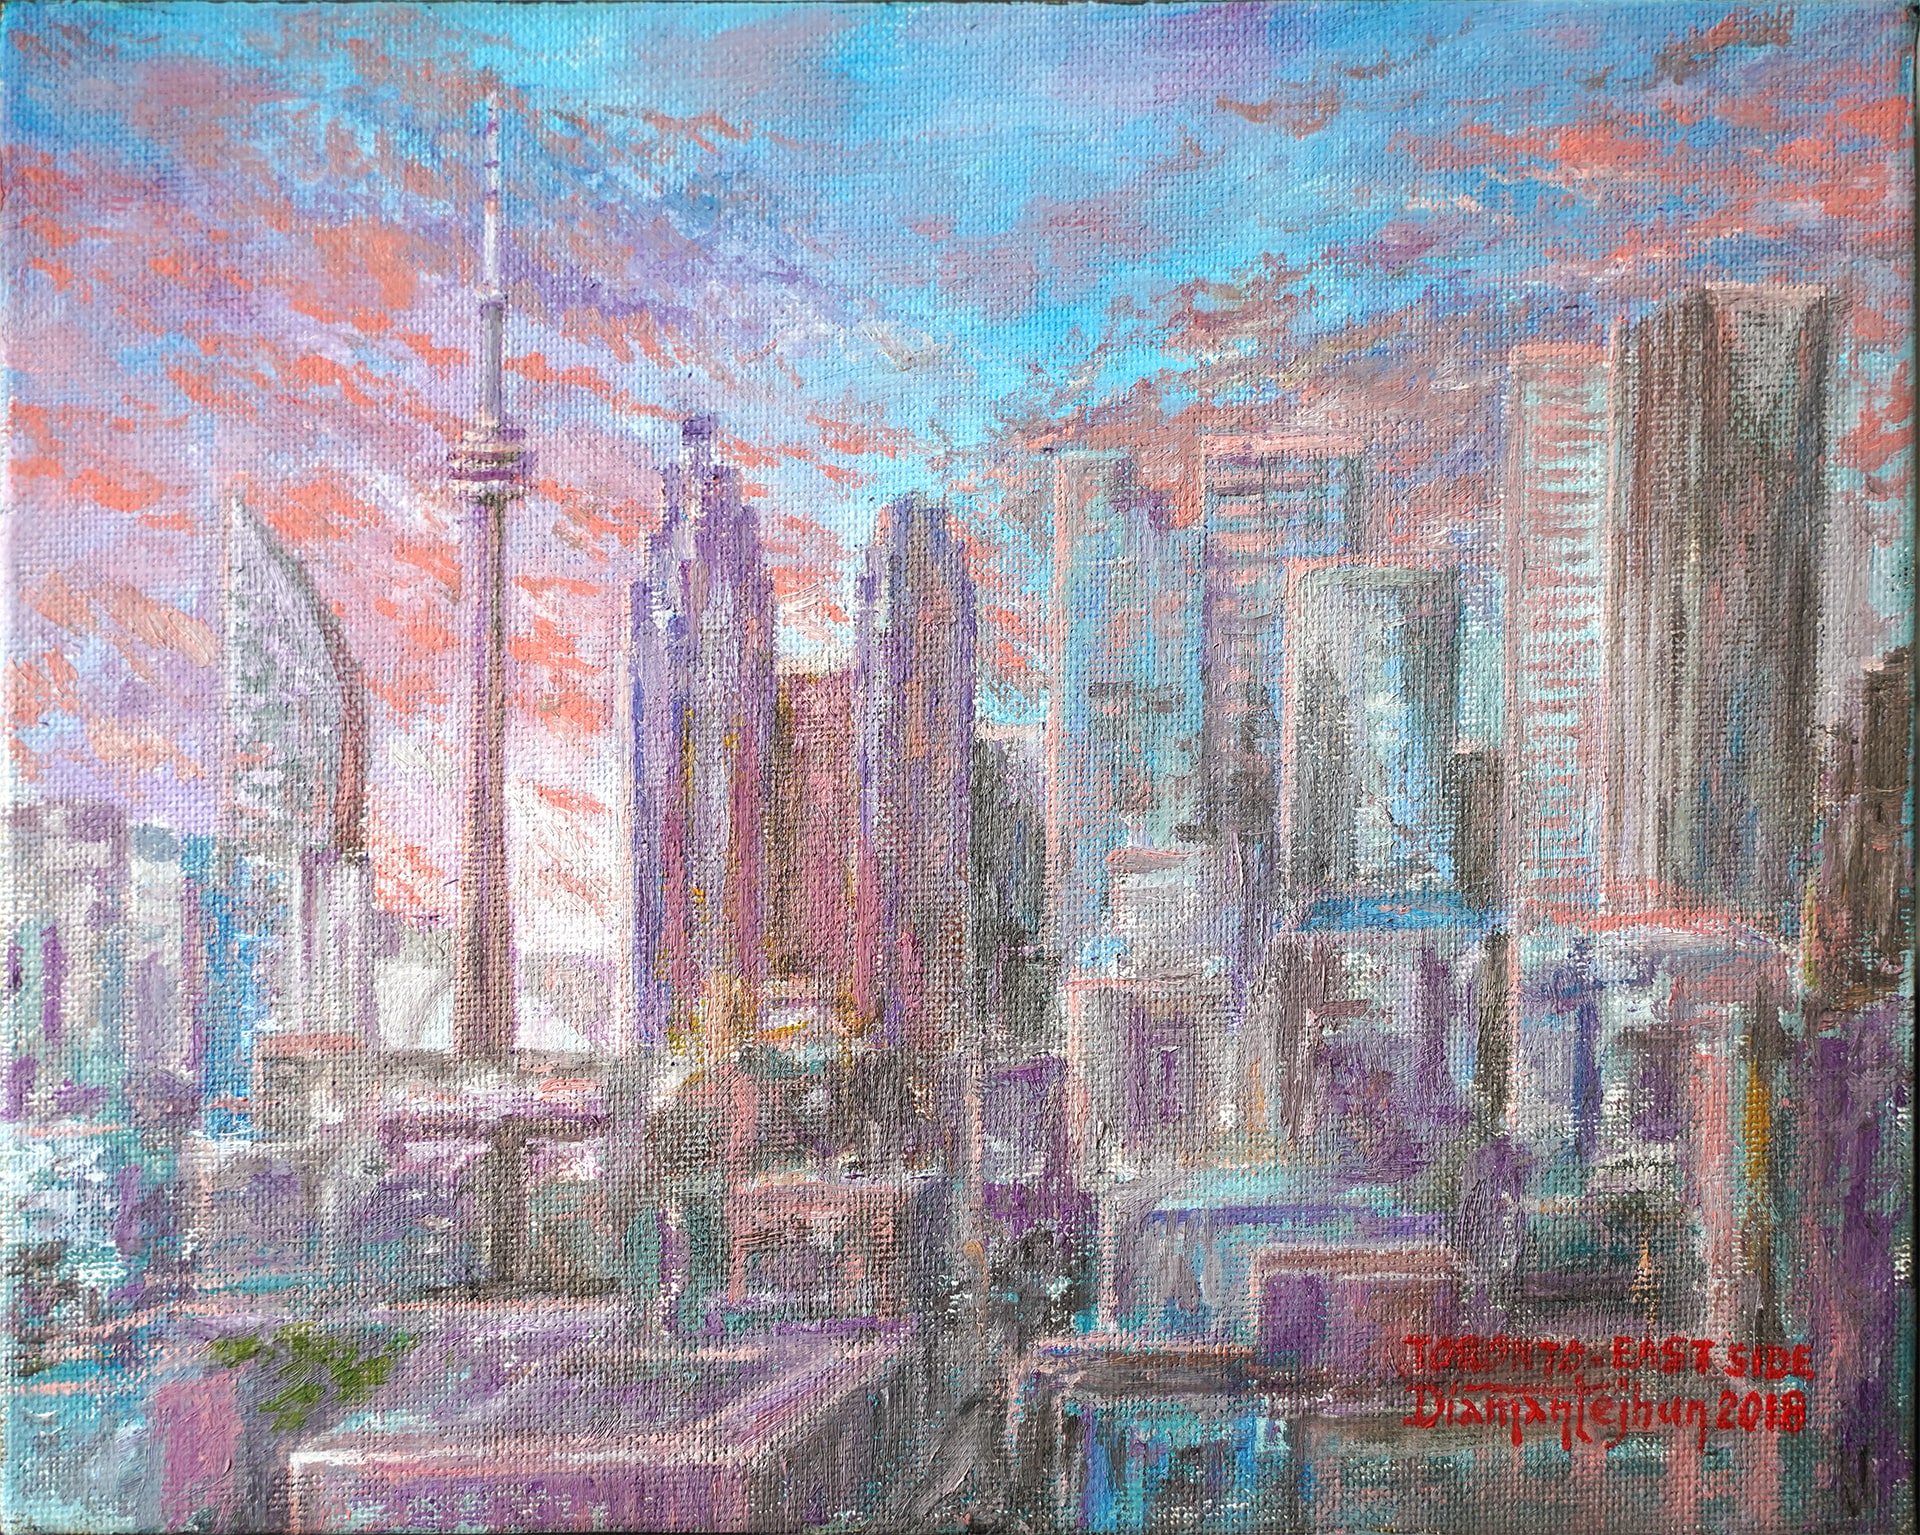 Toronto East Side Oil on canvas 10” x 8” 2018 Markham Jhun Ciolo Diamante Donated to PAG Dec 20, 2022 for CTB